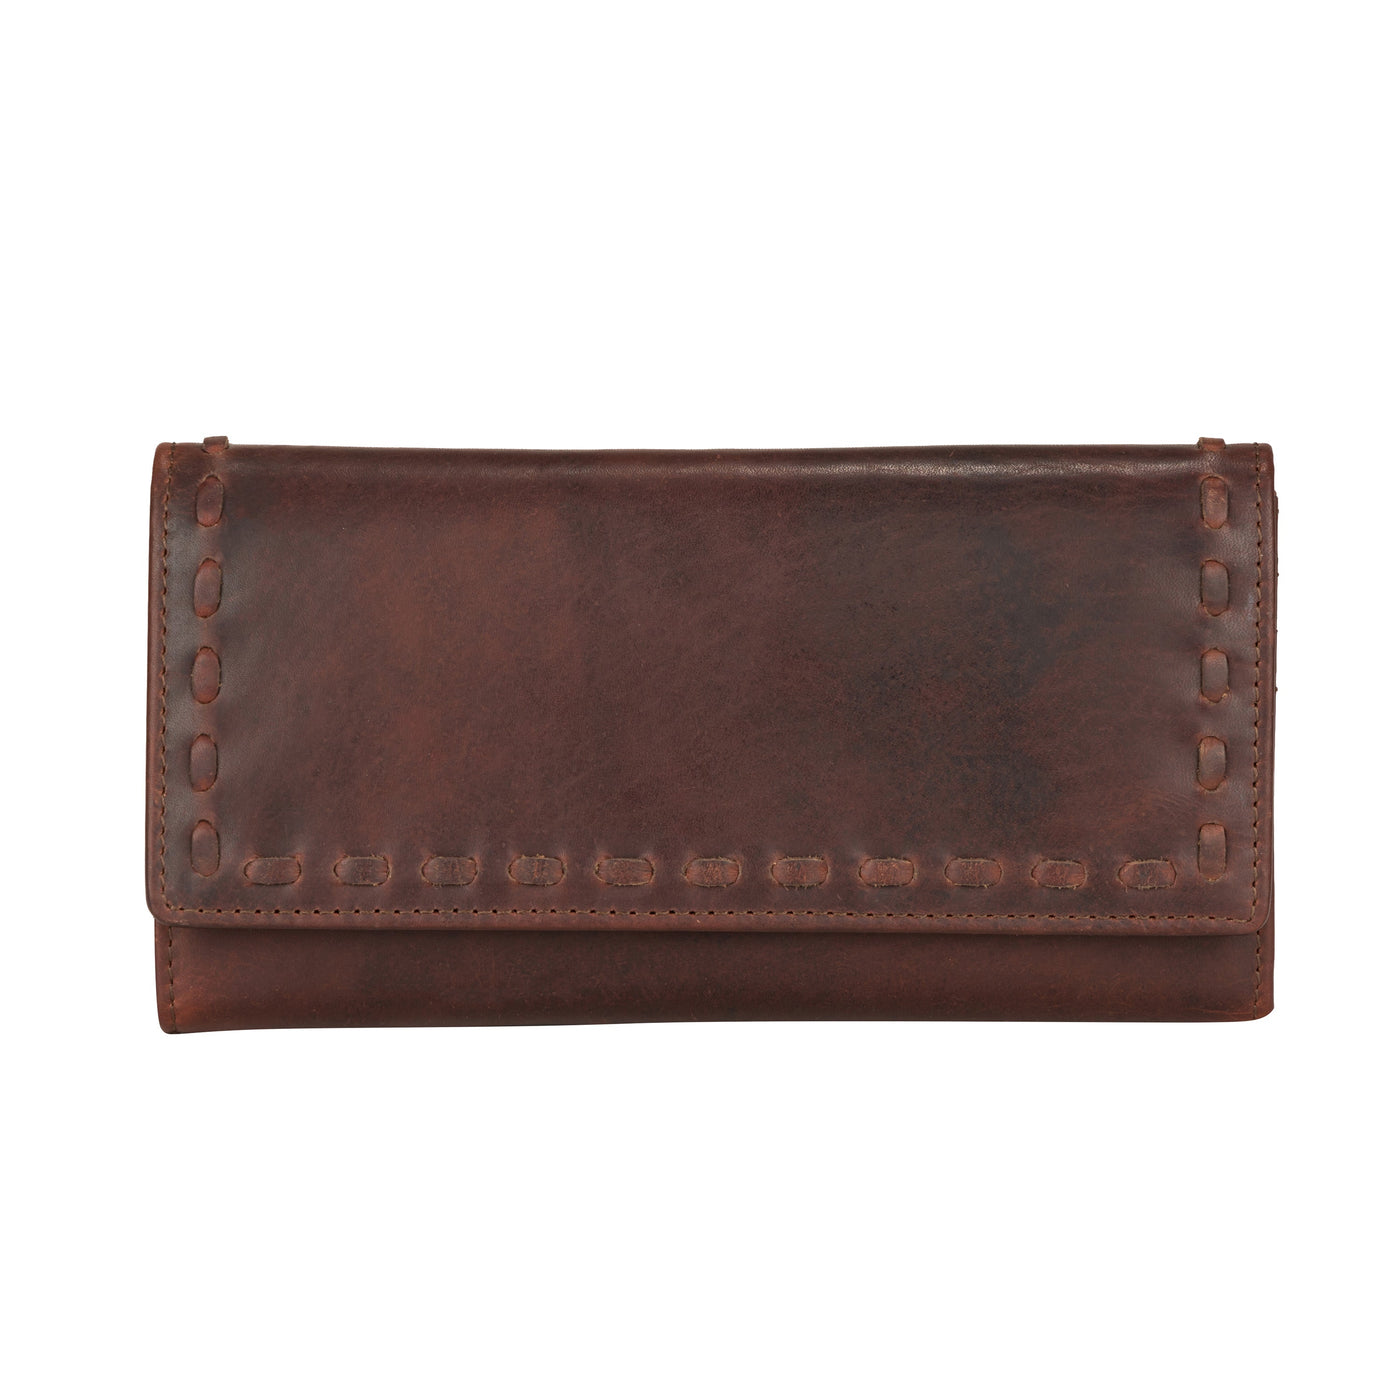 Hope RFID Leather Laced Wallet - Matching Wallet for Conceal Carry Purse - brown leather clutch wallet - leather clutch wallet purse bag - classic leather clutch wallet - gray leather clutch wallet small wallets for women - mini wallet - ladies wallet purse - women wallet sale - best small wallets for women